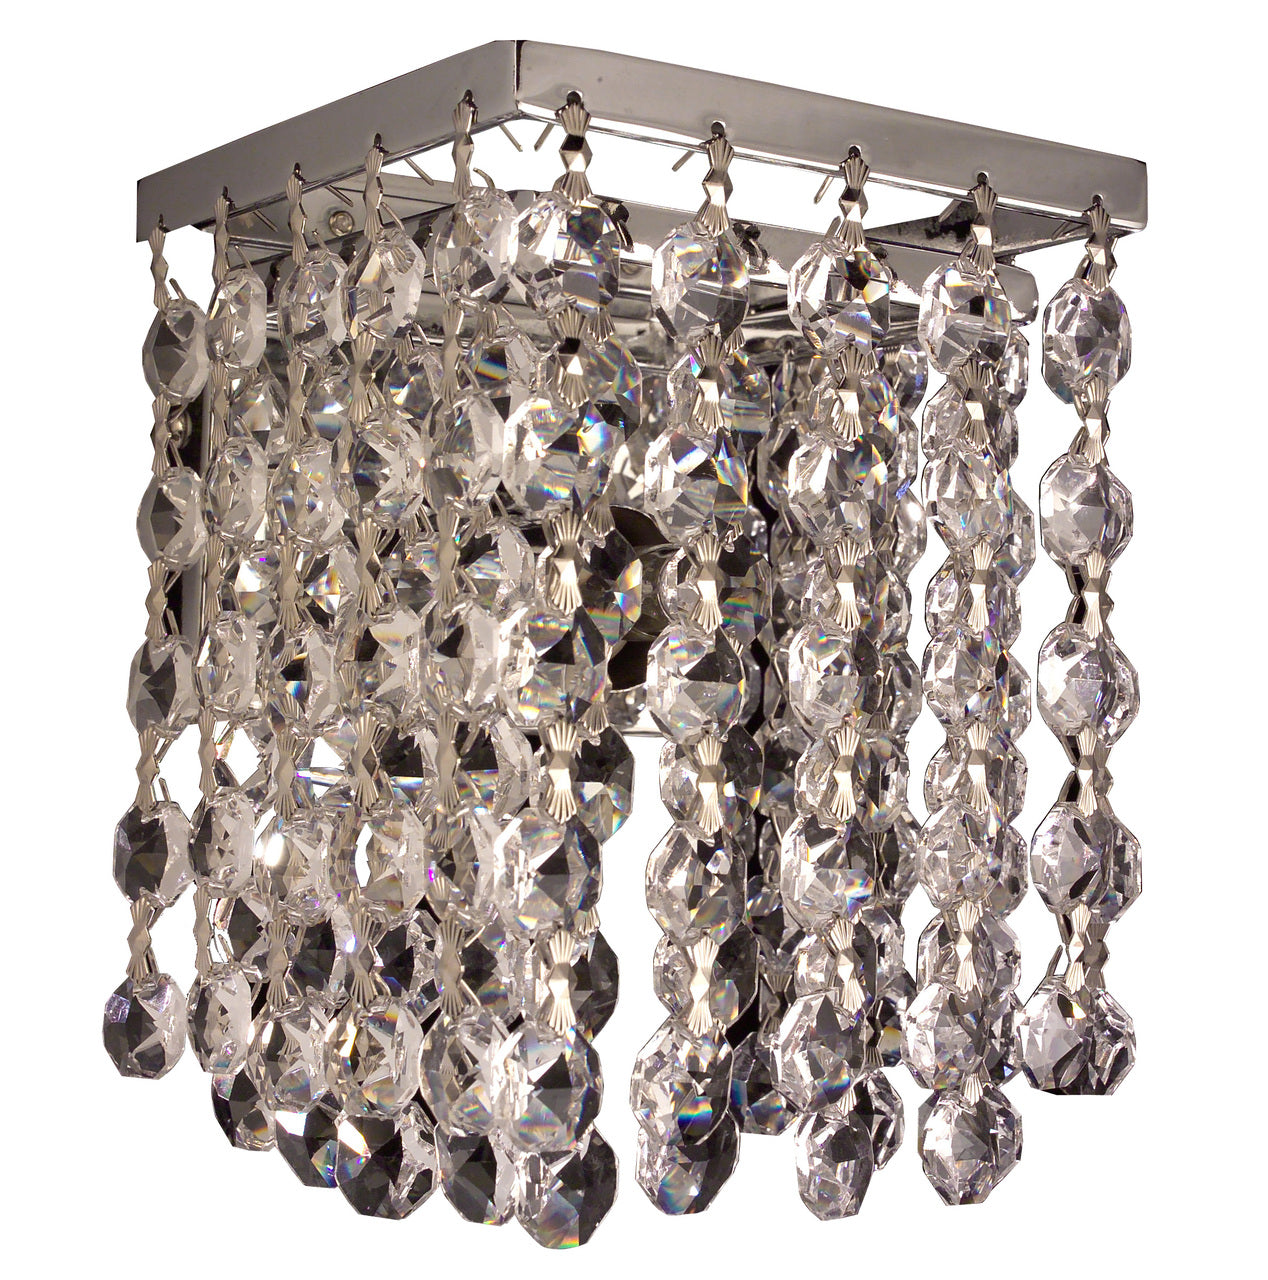 Classic Lighting 16102 AG Bedazzle Crystal Wall Sconce in Chrome